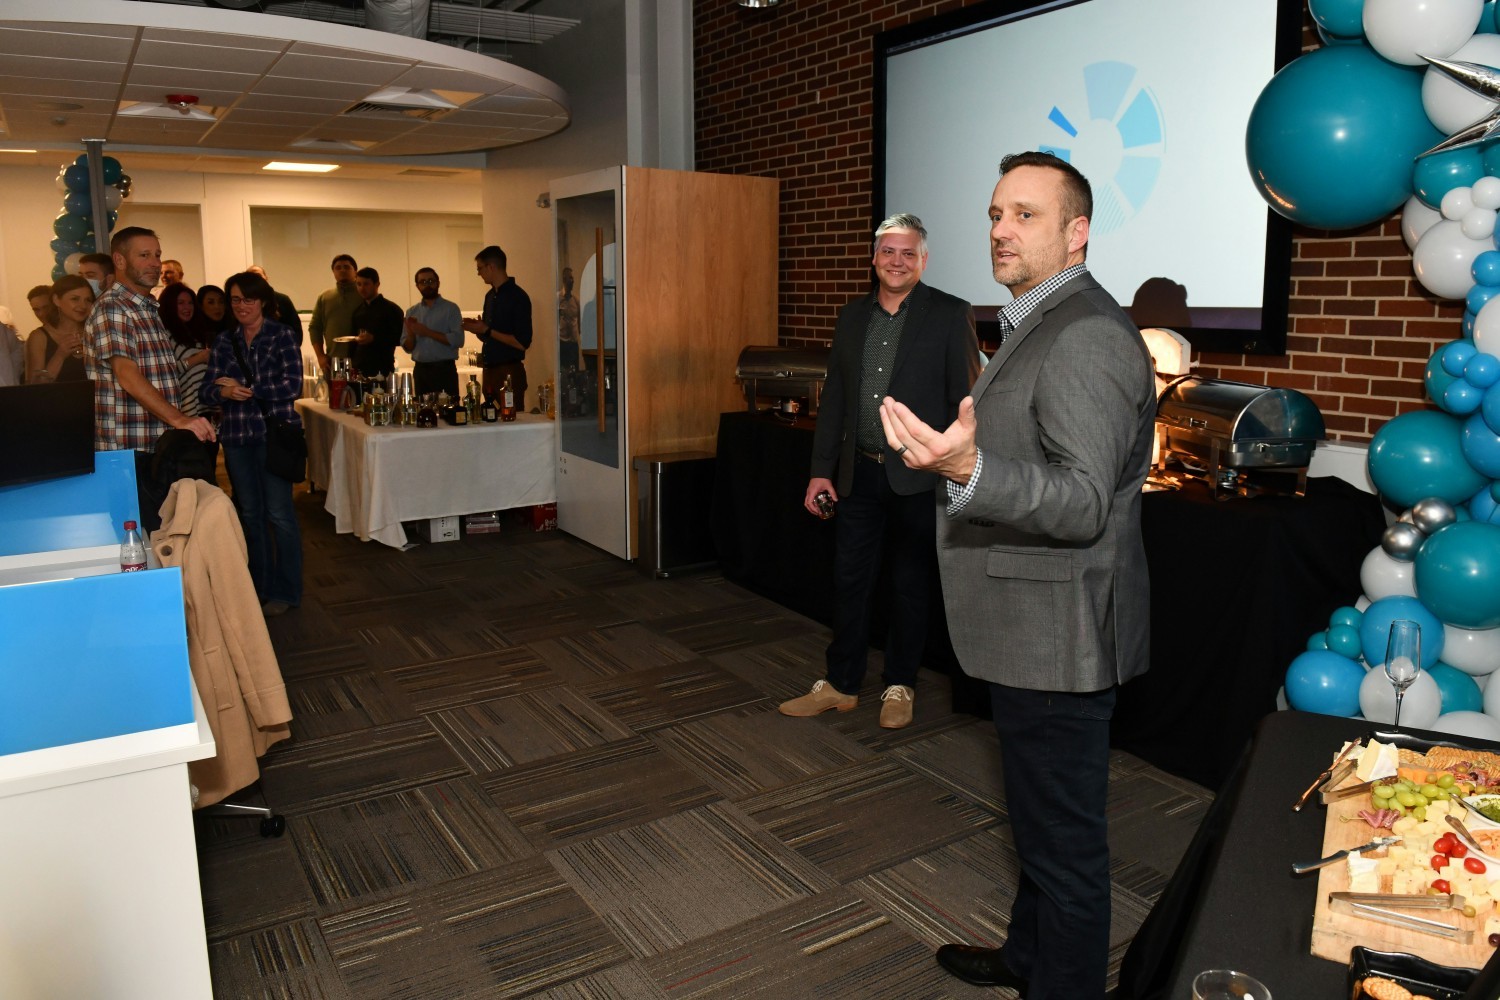 Eric Howerton, WhyteSpyder Founder, Chief Growth Officer at our Grand Opening for our new building